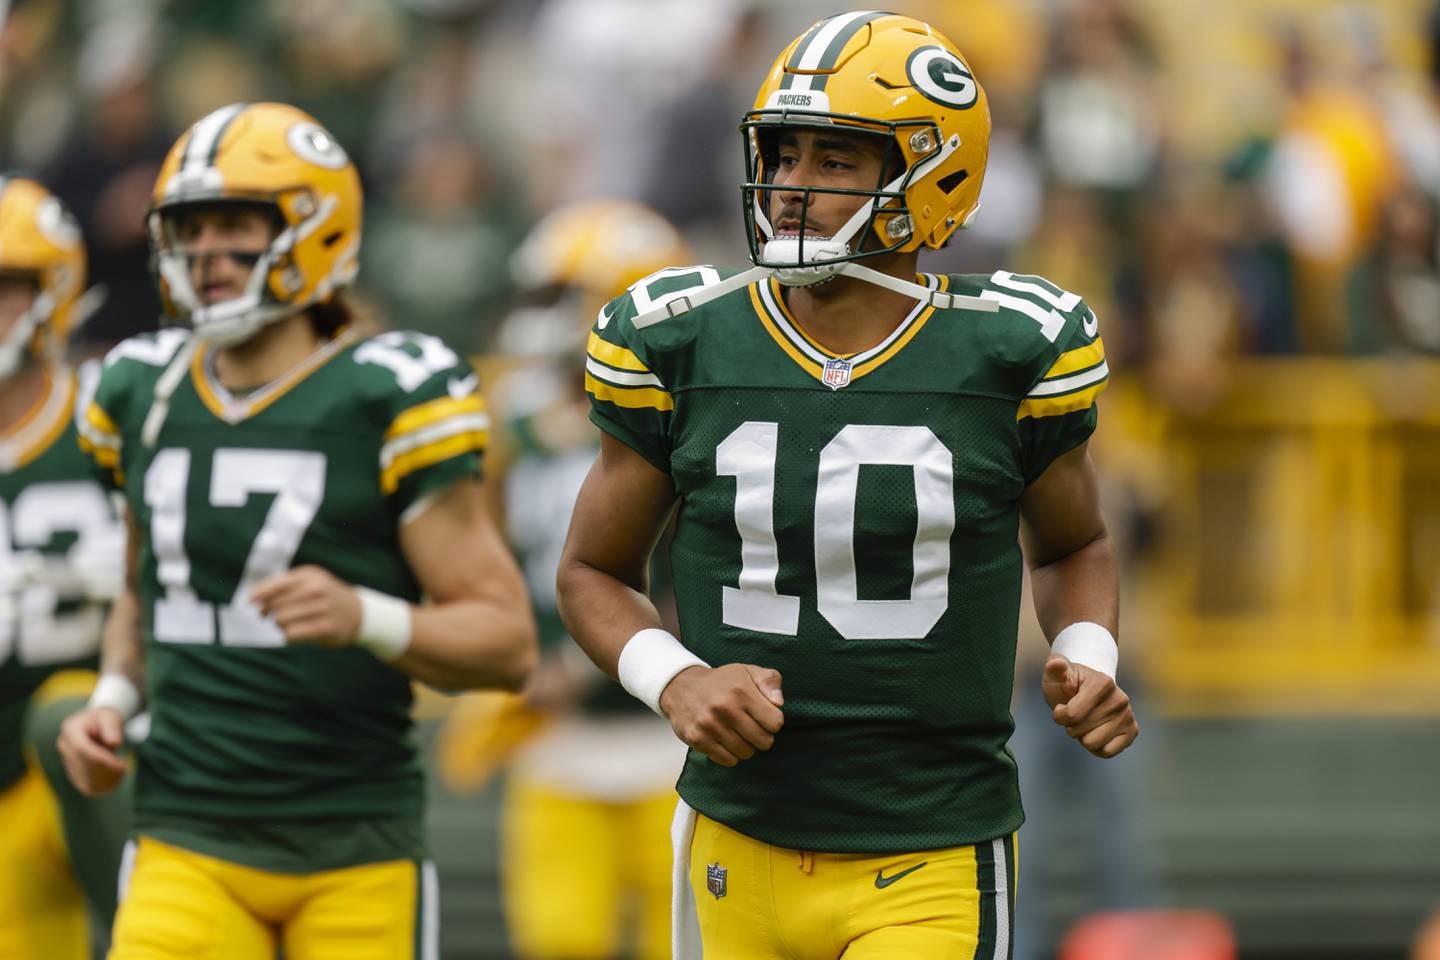 Green Bay Packers quarterback Jordan Love (10) runs onto the field during a preseason NFL football game between the Green Bay Packers and Seattle Seahawks Saturday, Aug. 26, 2023, in Green Bay, Wis.